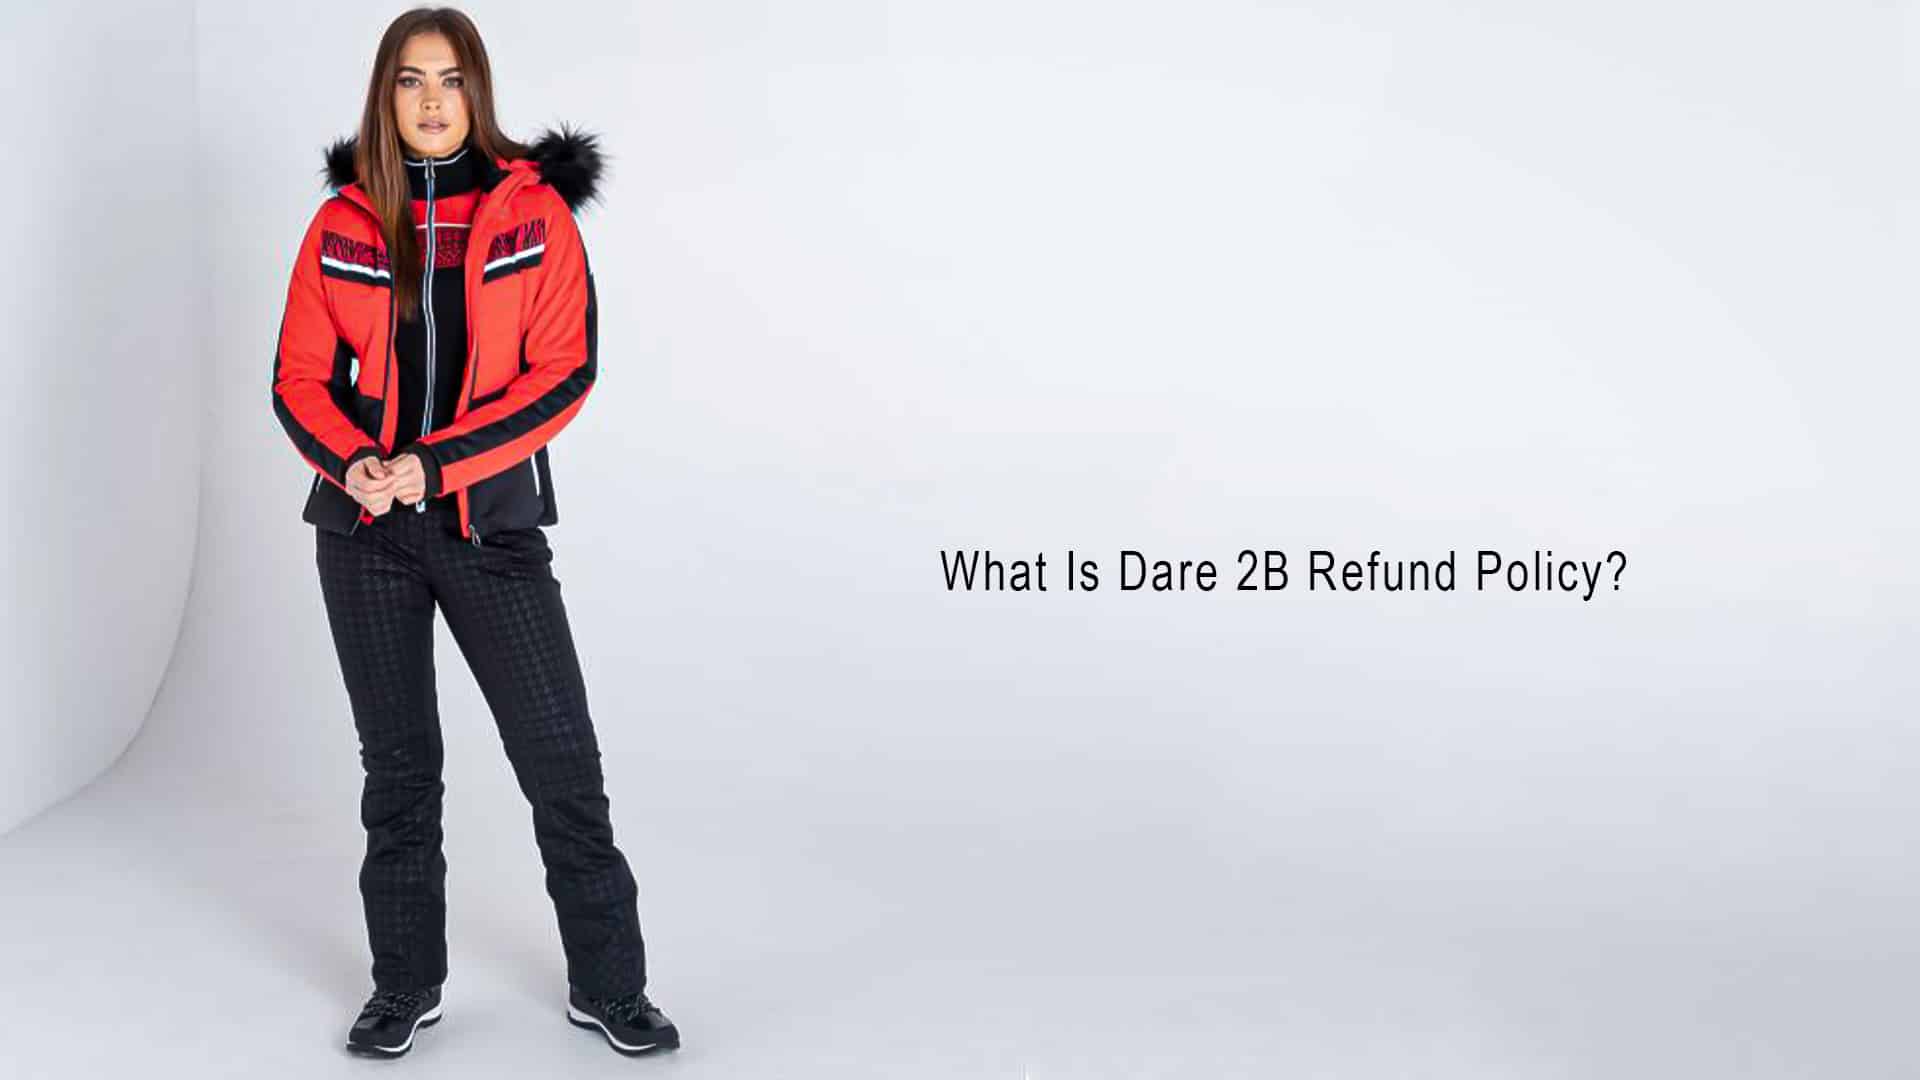 What is Dare 2B Refund Policy